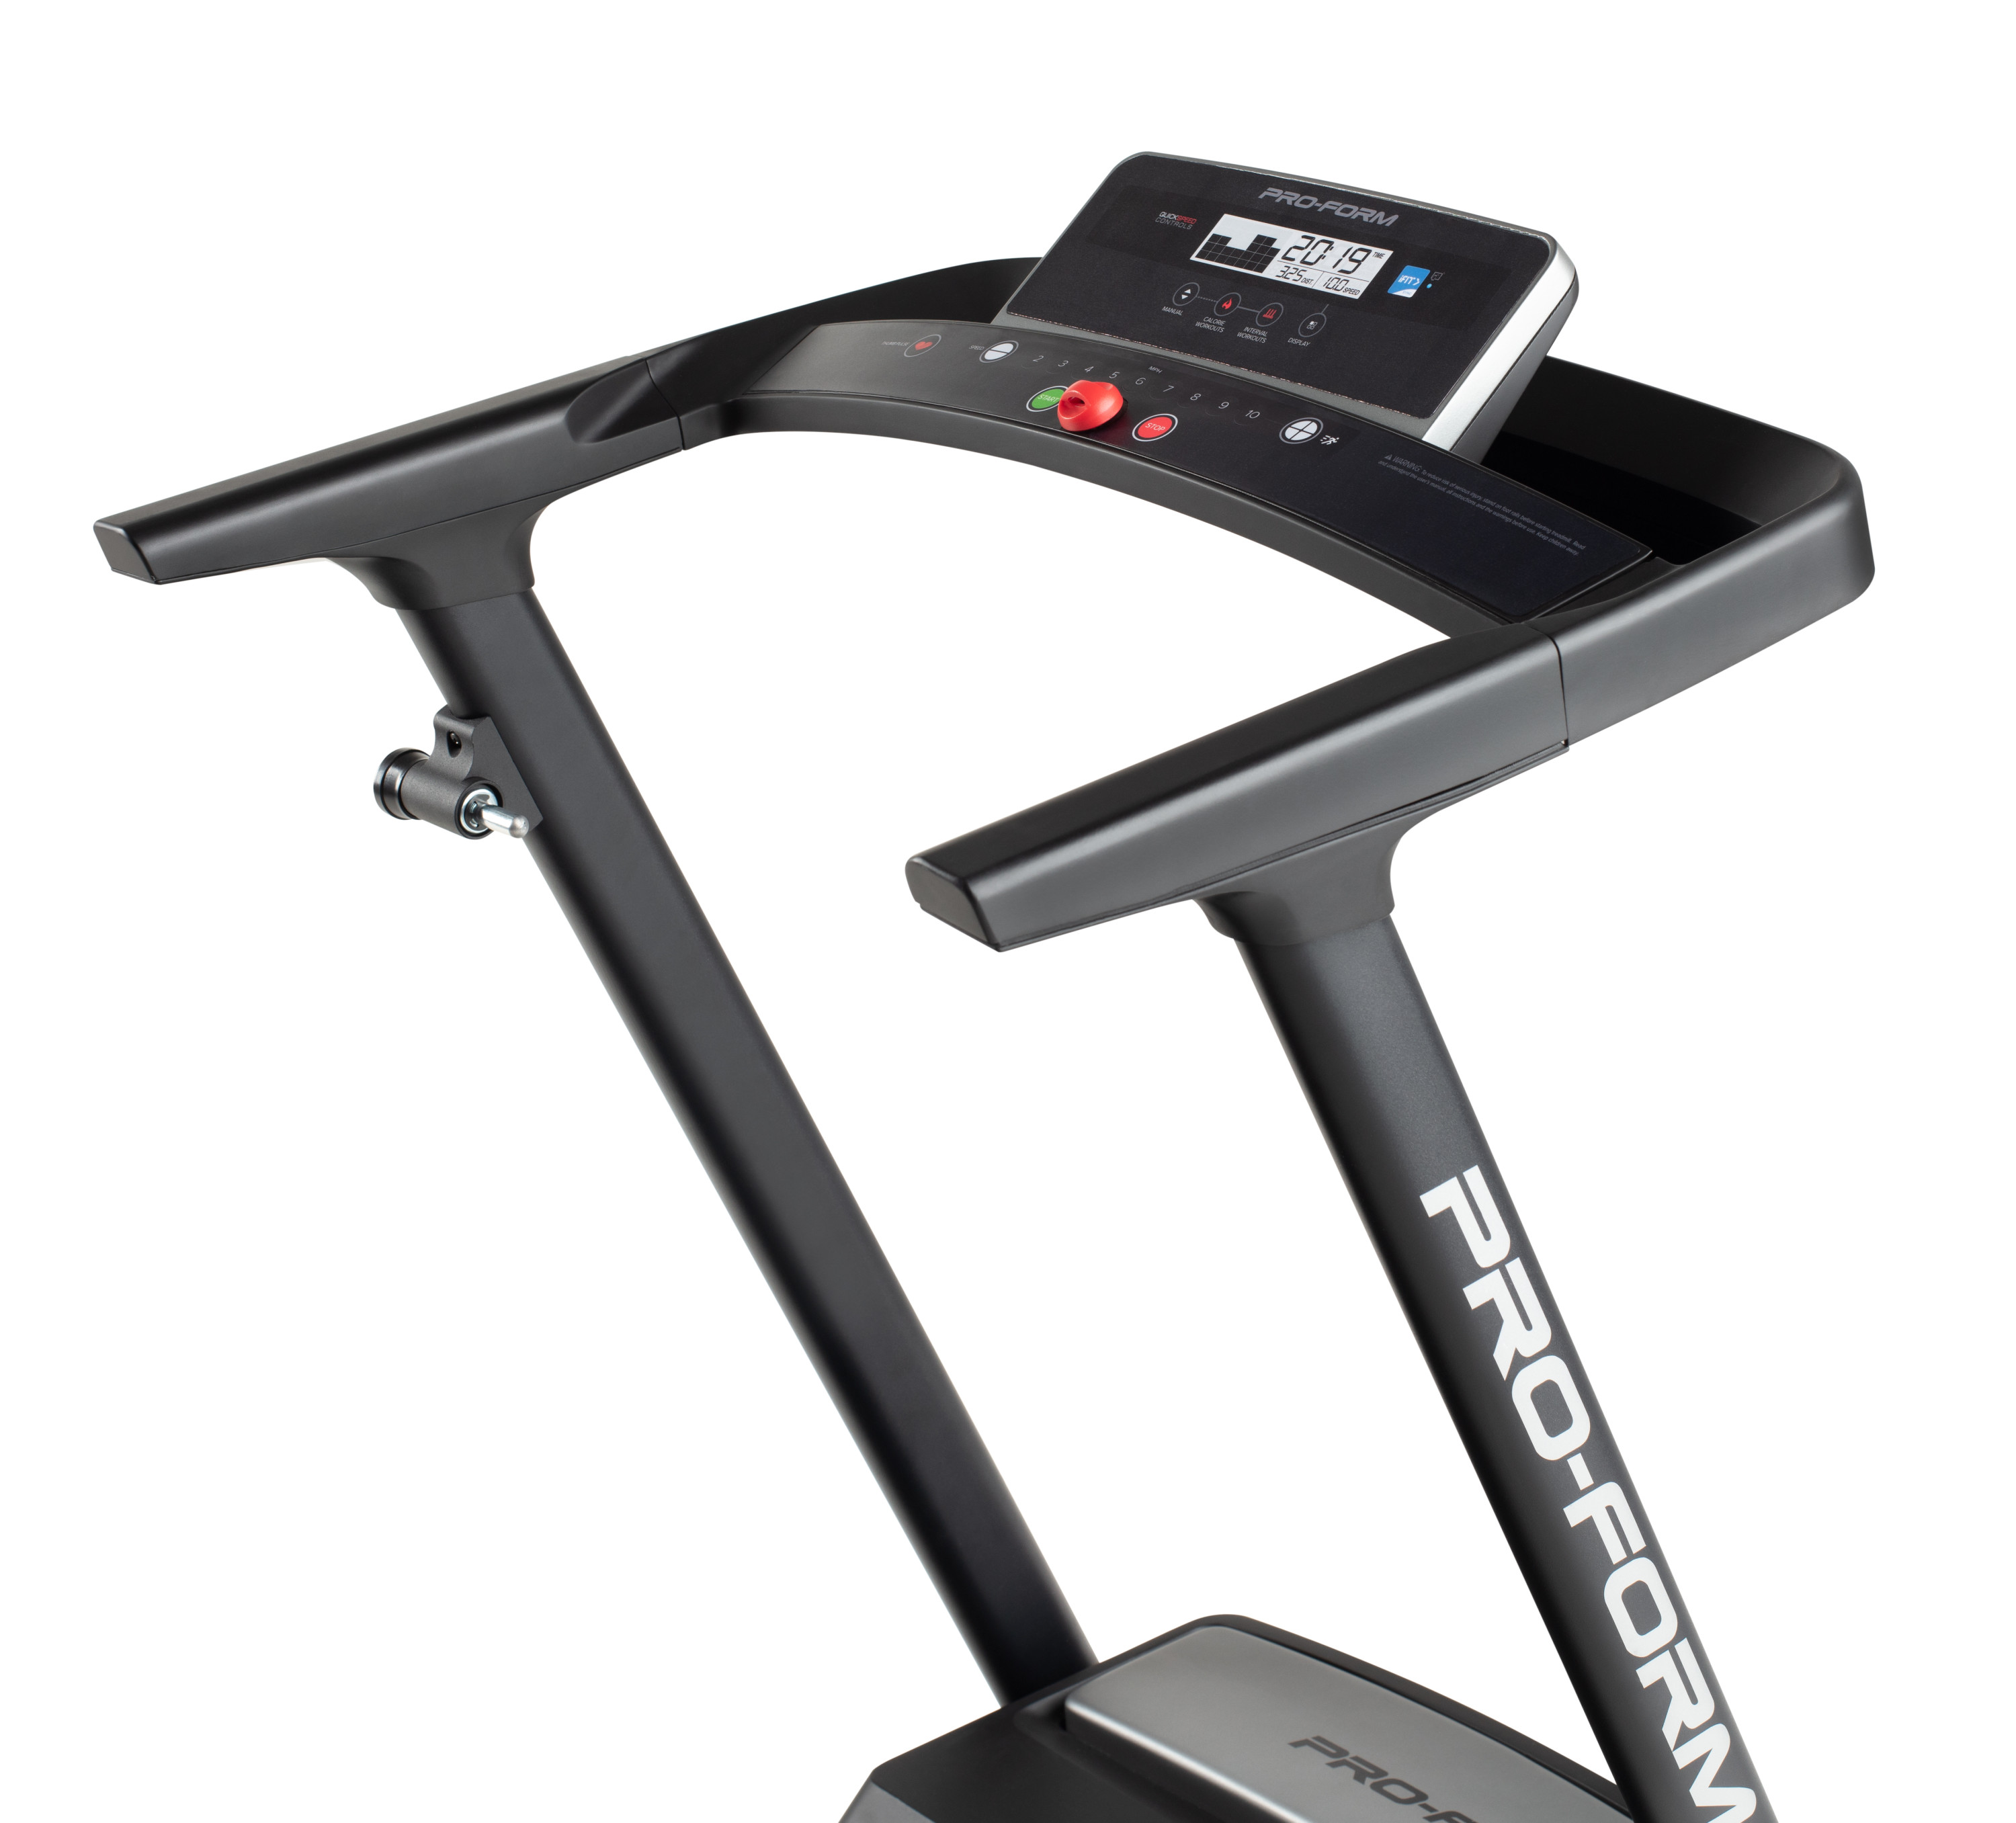 ProForm Cadence WLT Folding Treadmill with Reflex Deck for Walking and Jogging, iFit Bluetooth Enabled - image 11 of 31